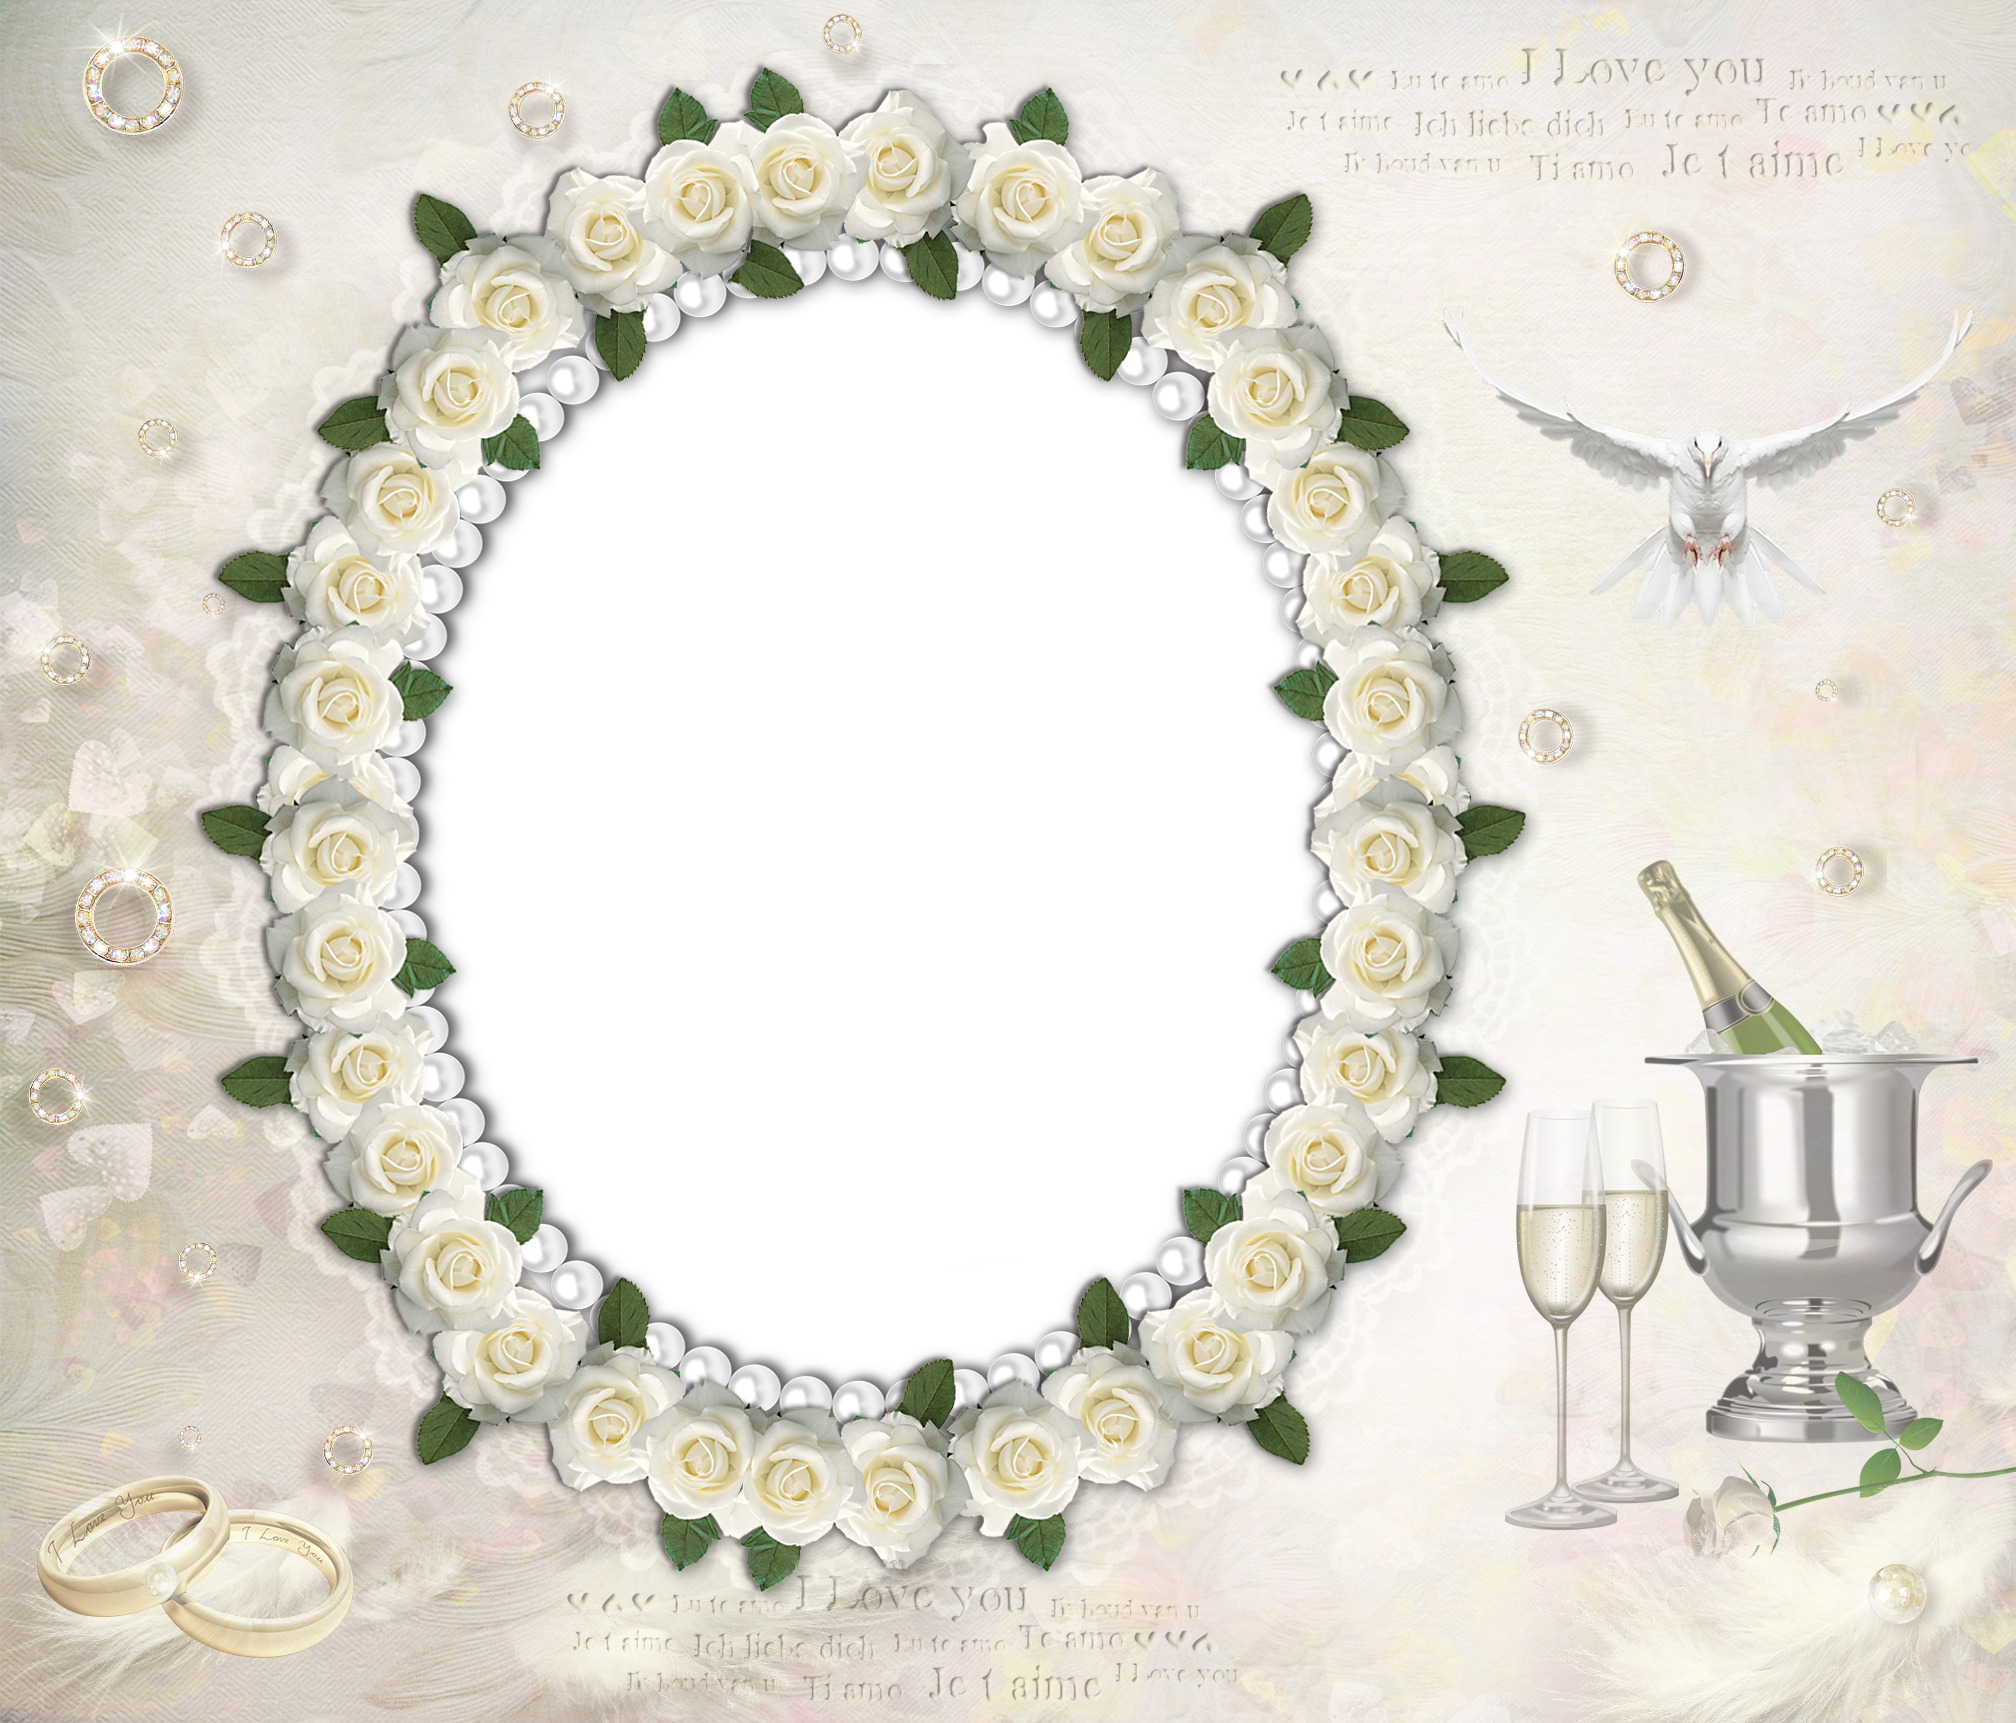 Transparent Wedding Frame with White Roses | Gallery Yopriceville - High-Quality ...